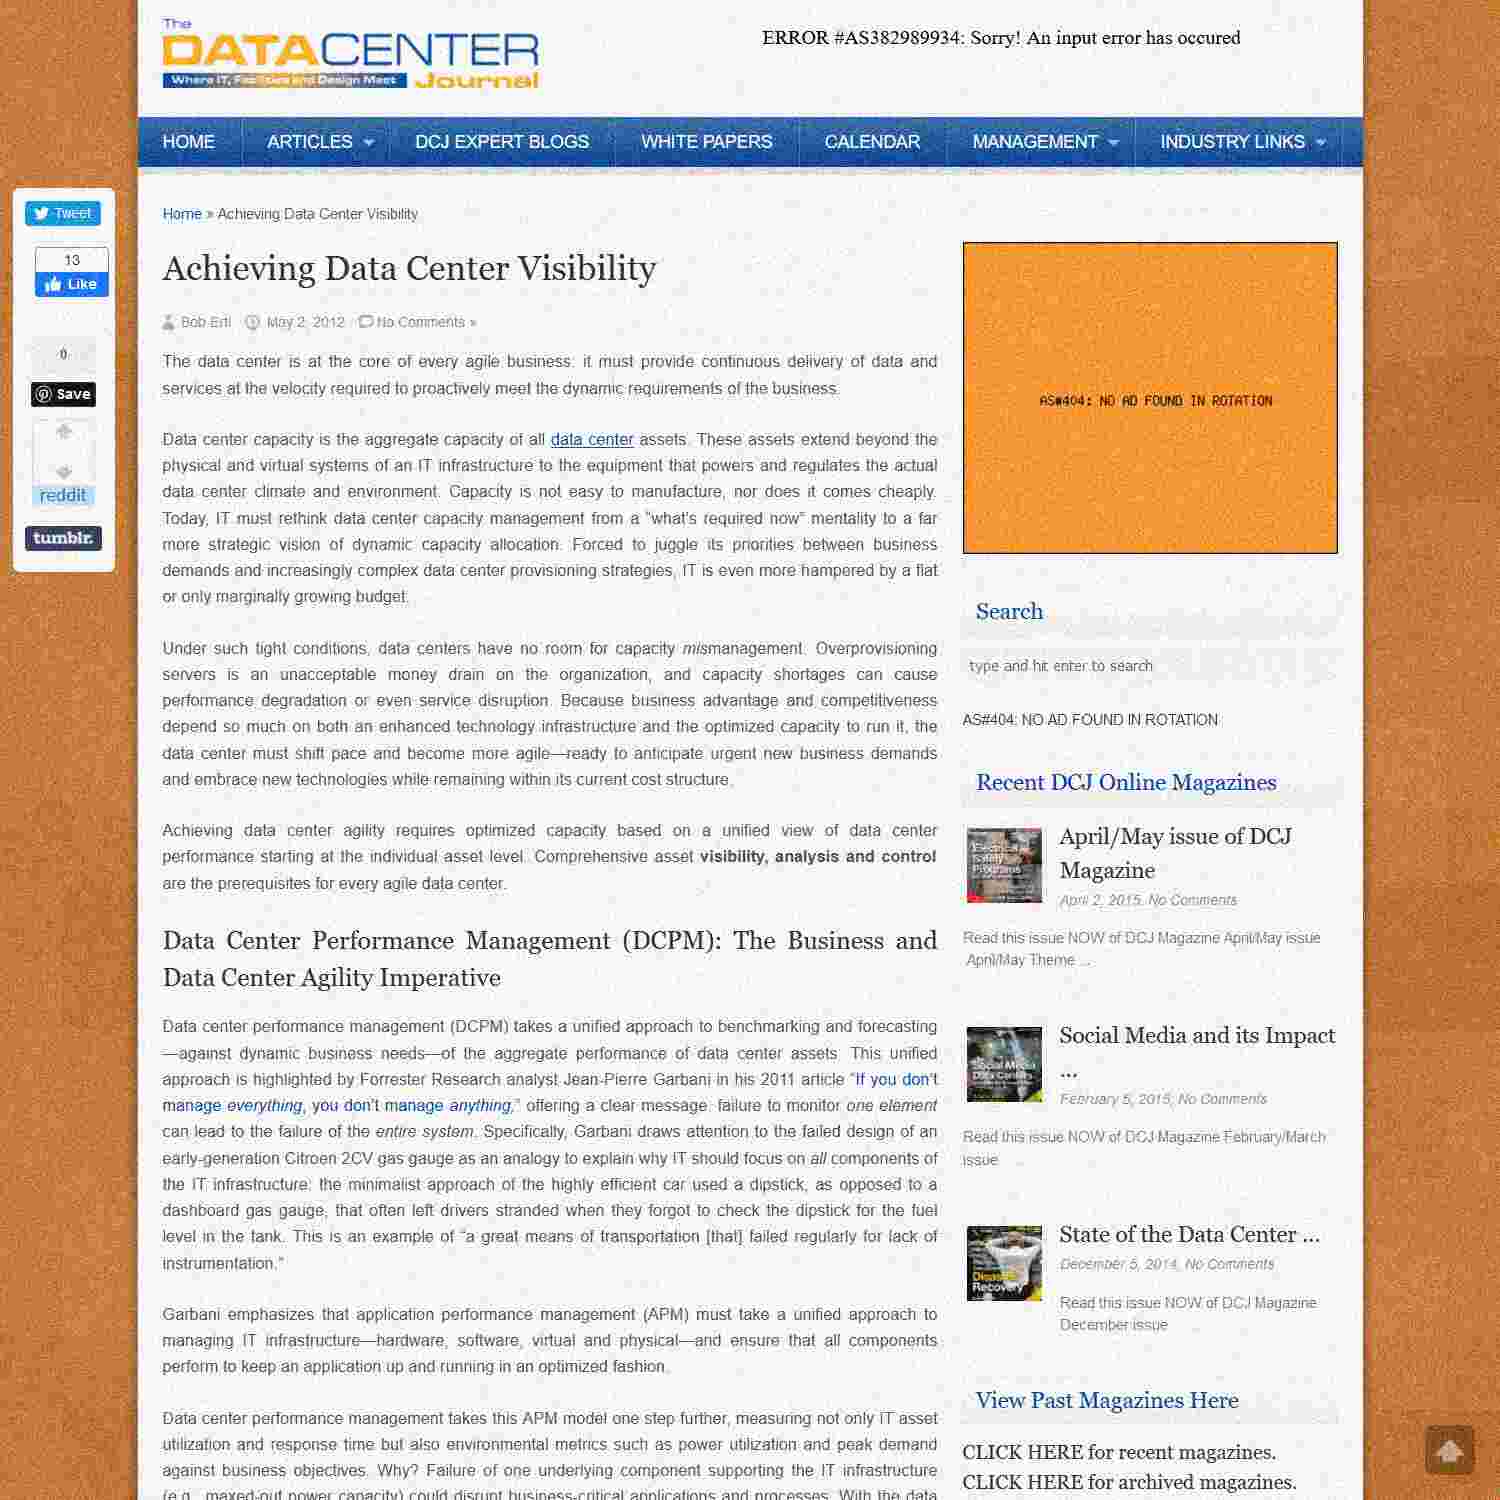 Illustration of Achieving Data Center Visibility